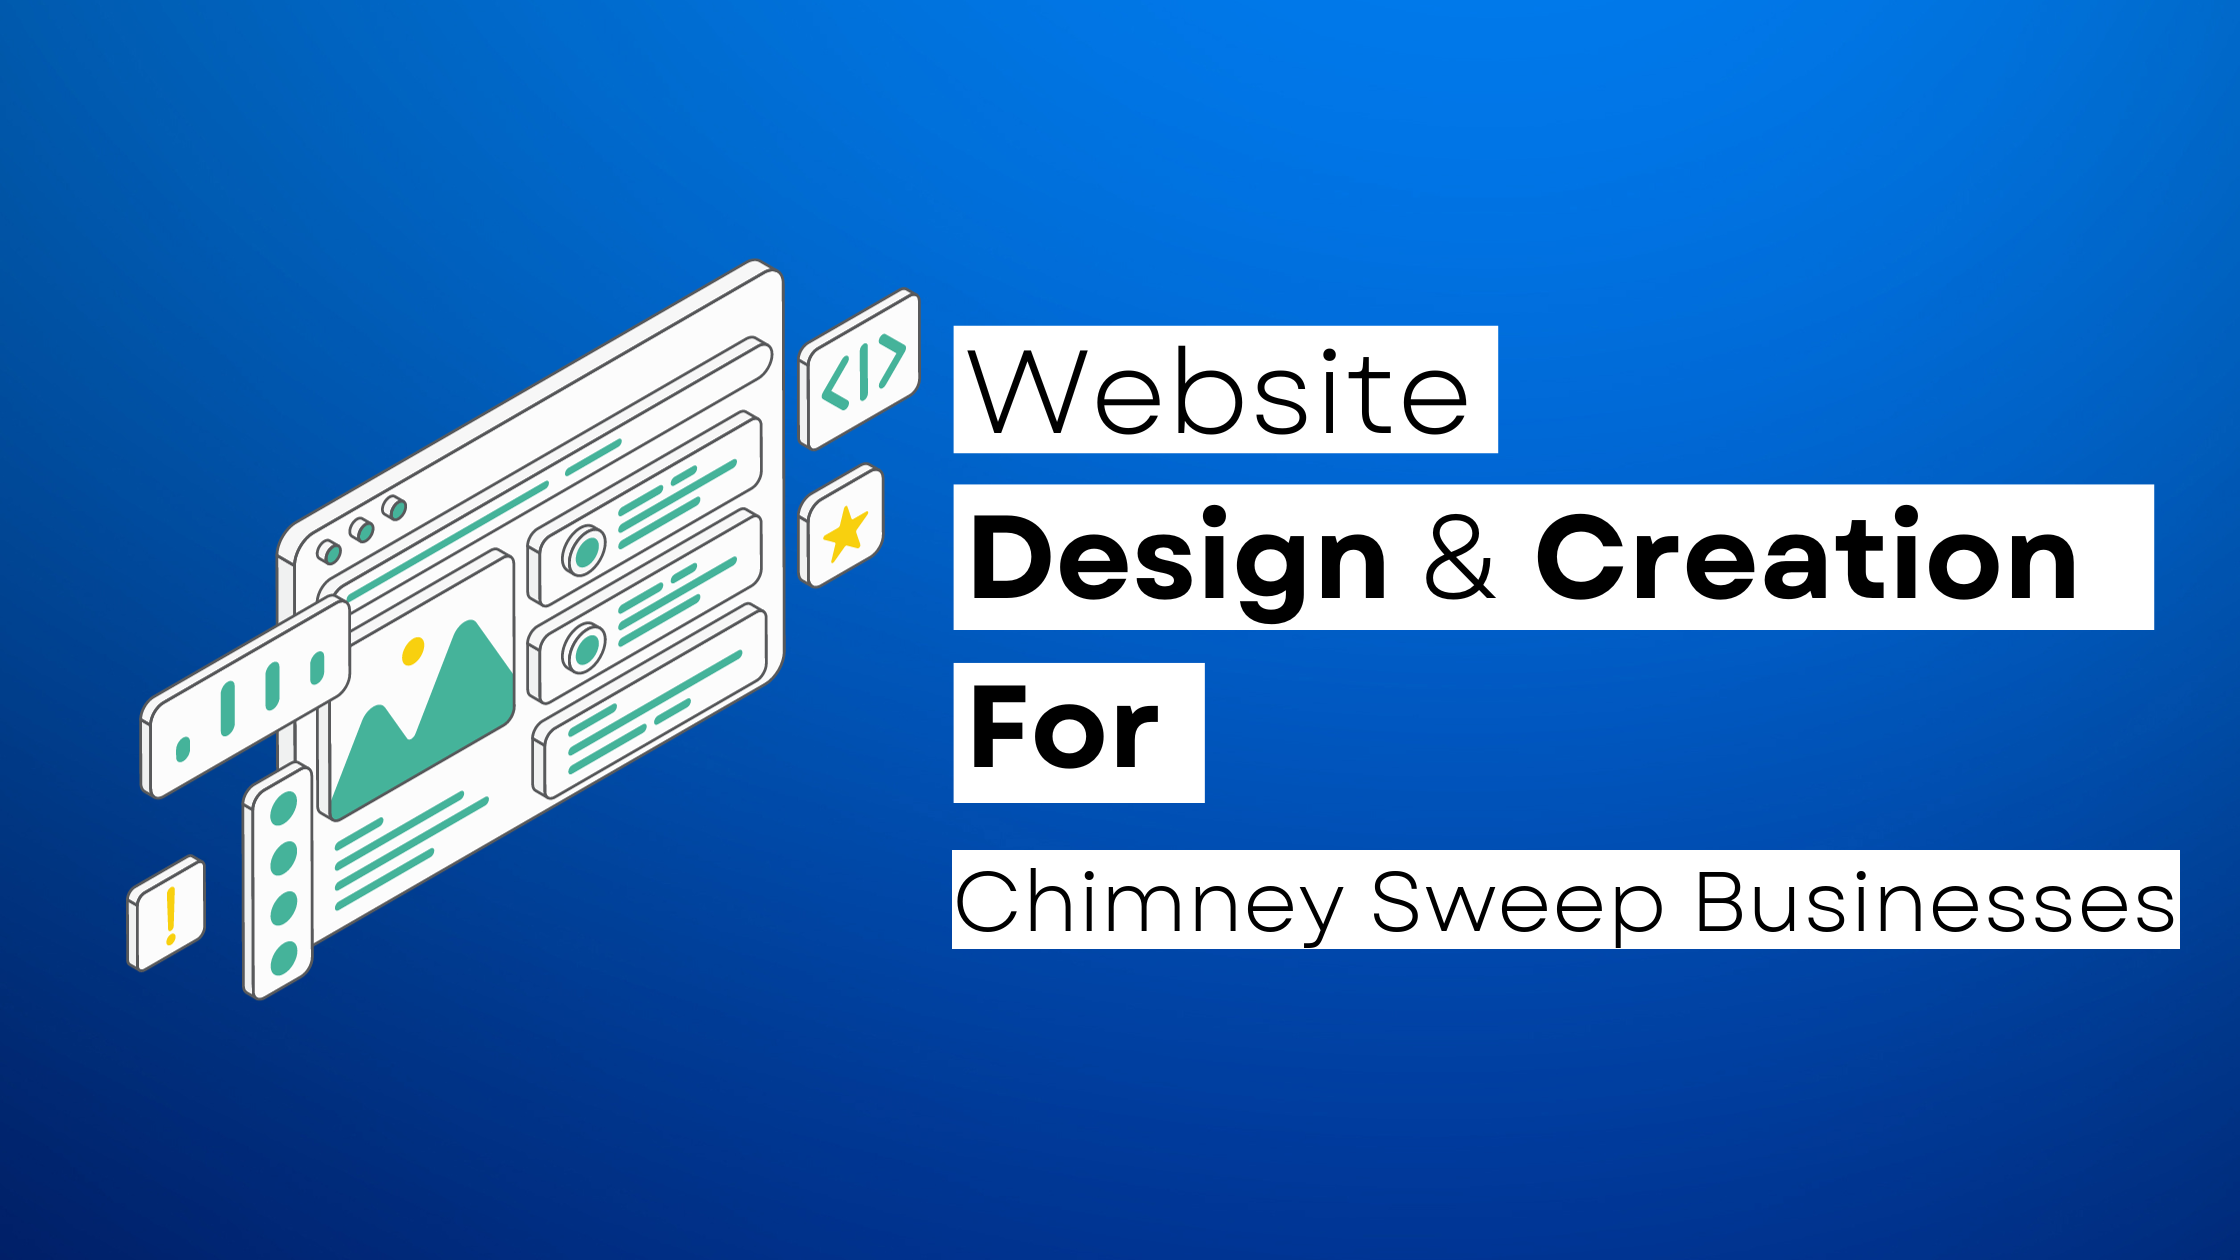 How to start a Chimney Sweep website